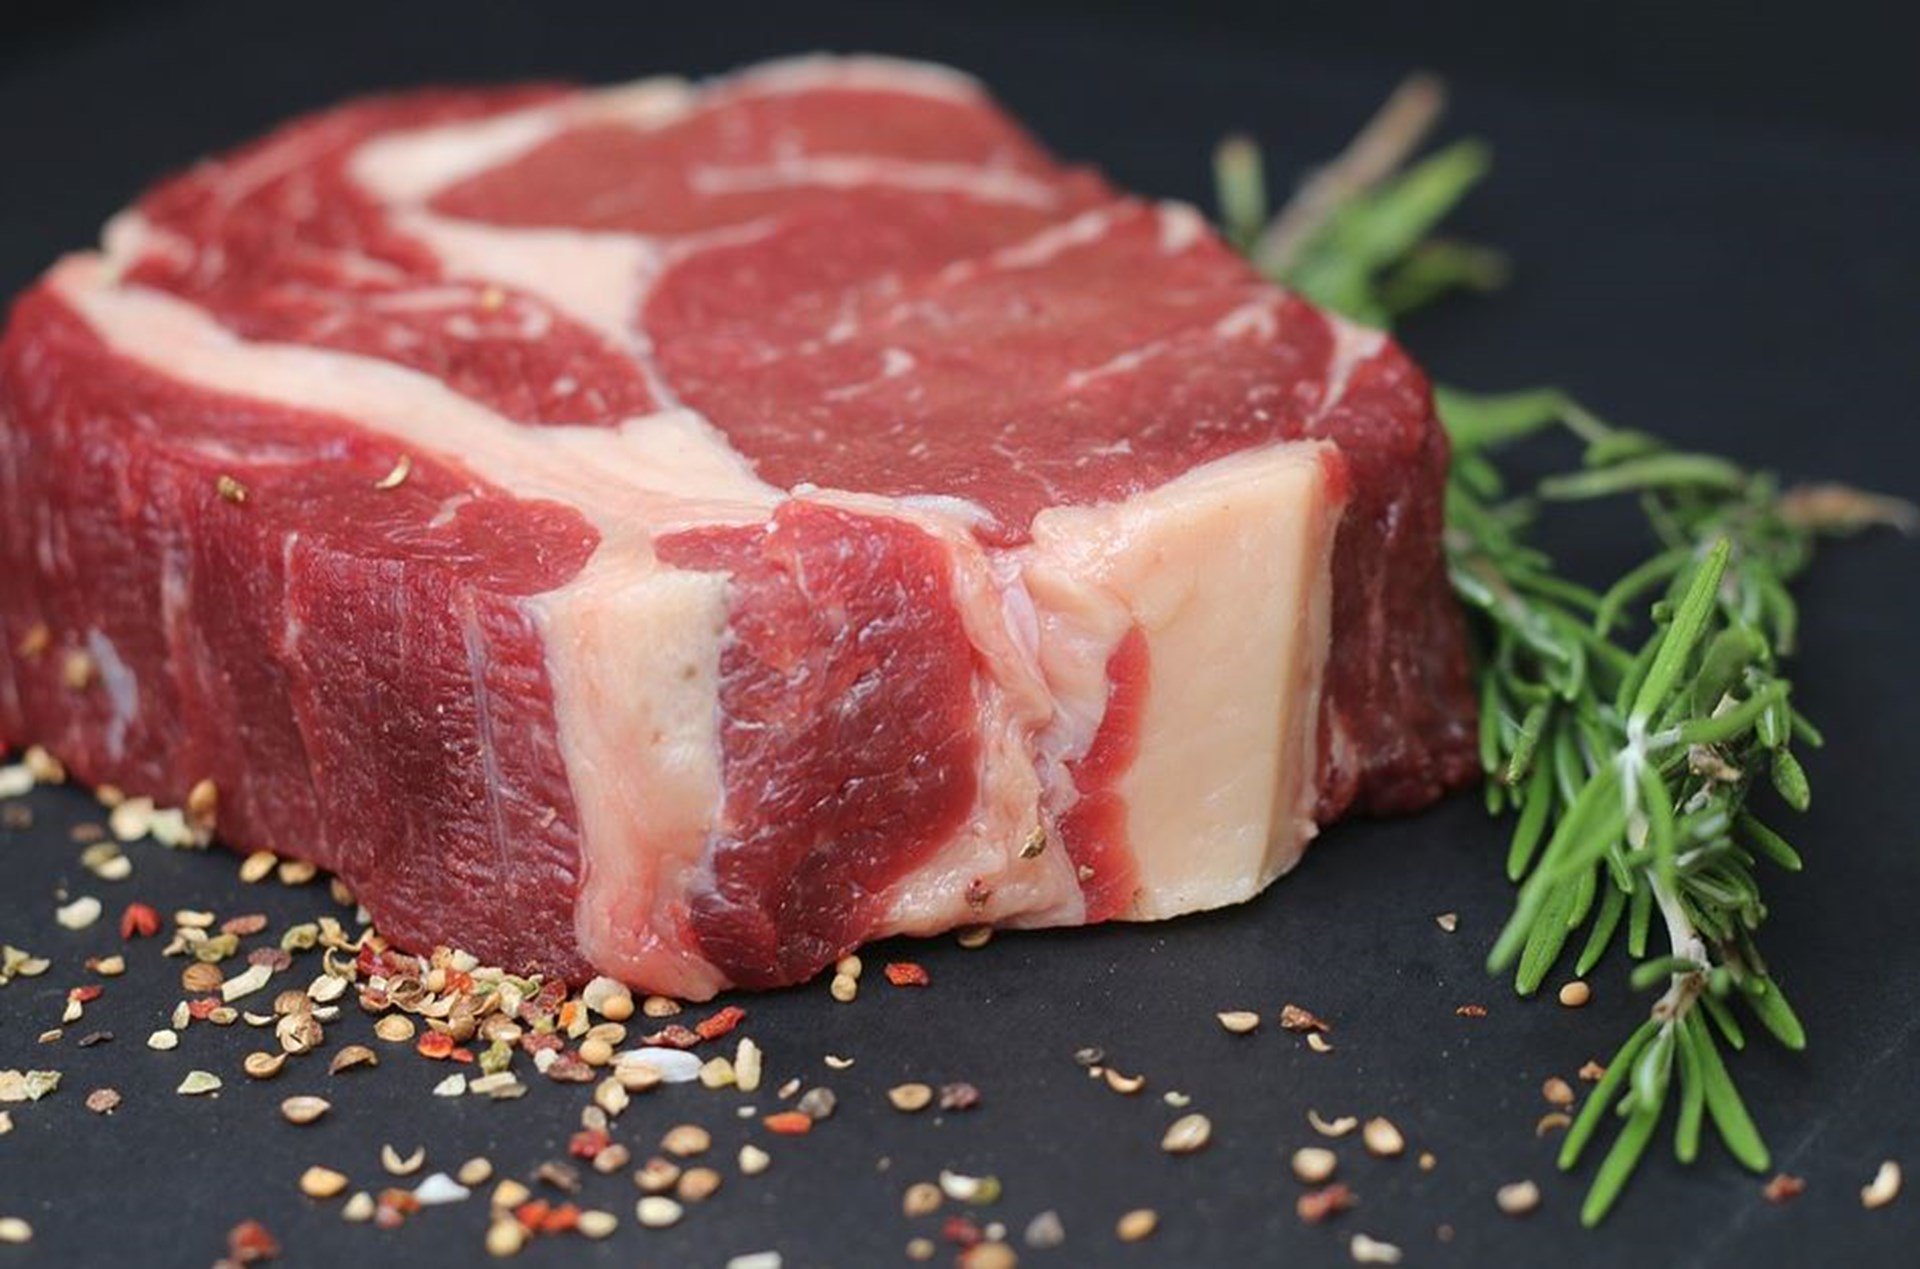 “The Food Supply Chain Is Breaking” And We Are Being Warned That “Meat Shortages” Are Imminent